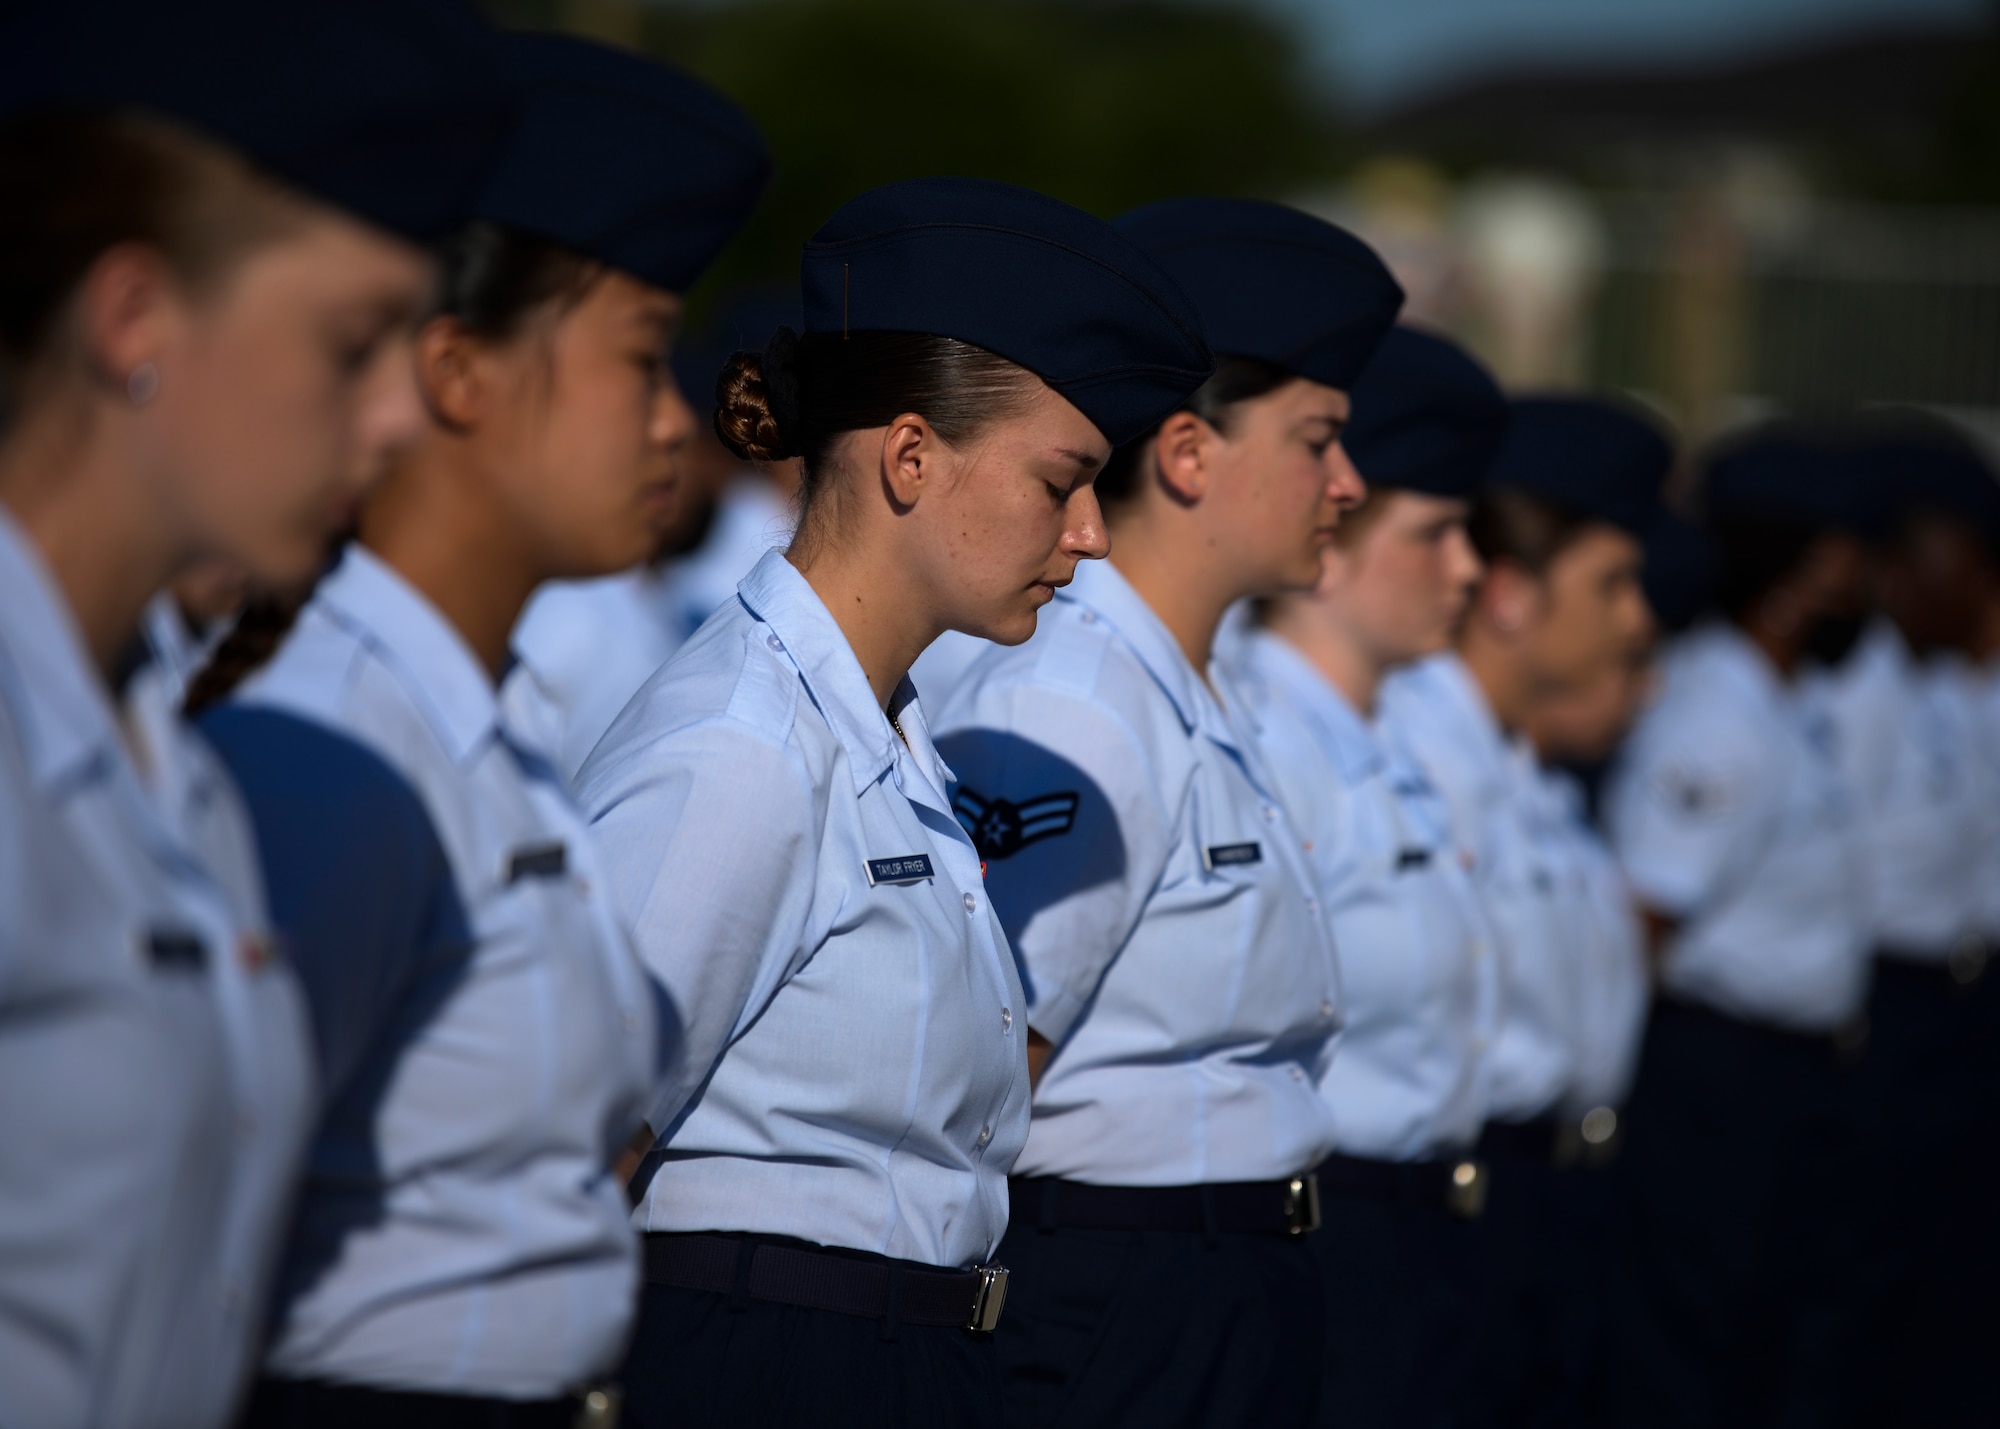 Airmen from the 81st Training Group stand in formation during the 81st Training Wing change of command ceremony on the Levitow Training Support Facility drill pad at Keesler Air Force Base, Mississippi, June 17, 2021. The ceremony is a symbol of command being exchanged from one commander to the next by the handing-off of a ceremonial guidon. U.S. Air Force Col. Heather Blackwell relinquished command of the 81st TRW to Col. William Hunter. (U.S. Air Force photo by Senior Airman Spencer Tobler)